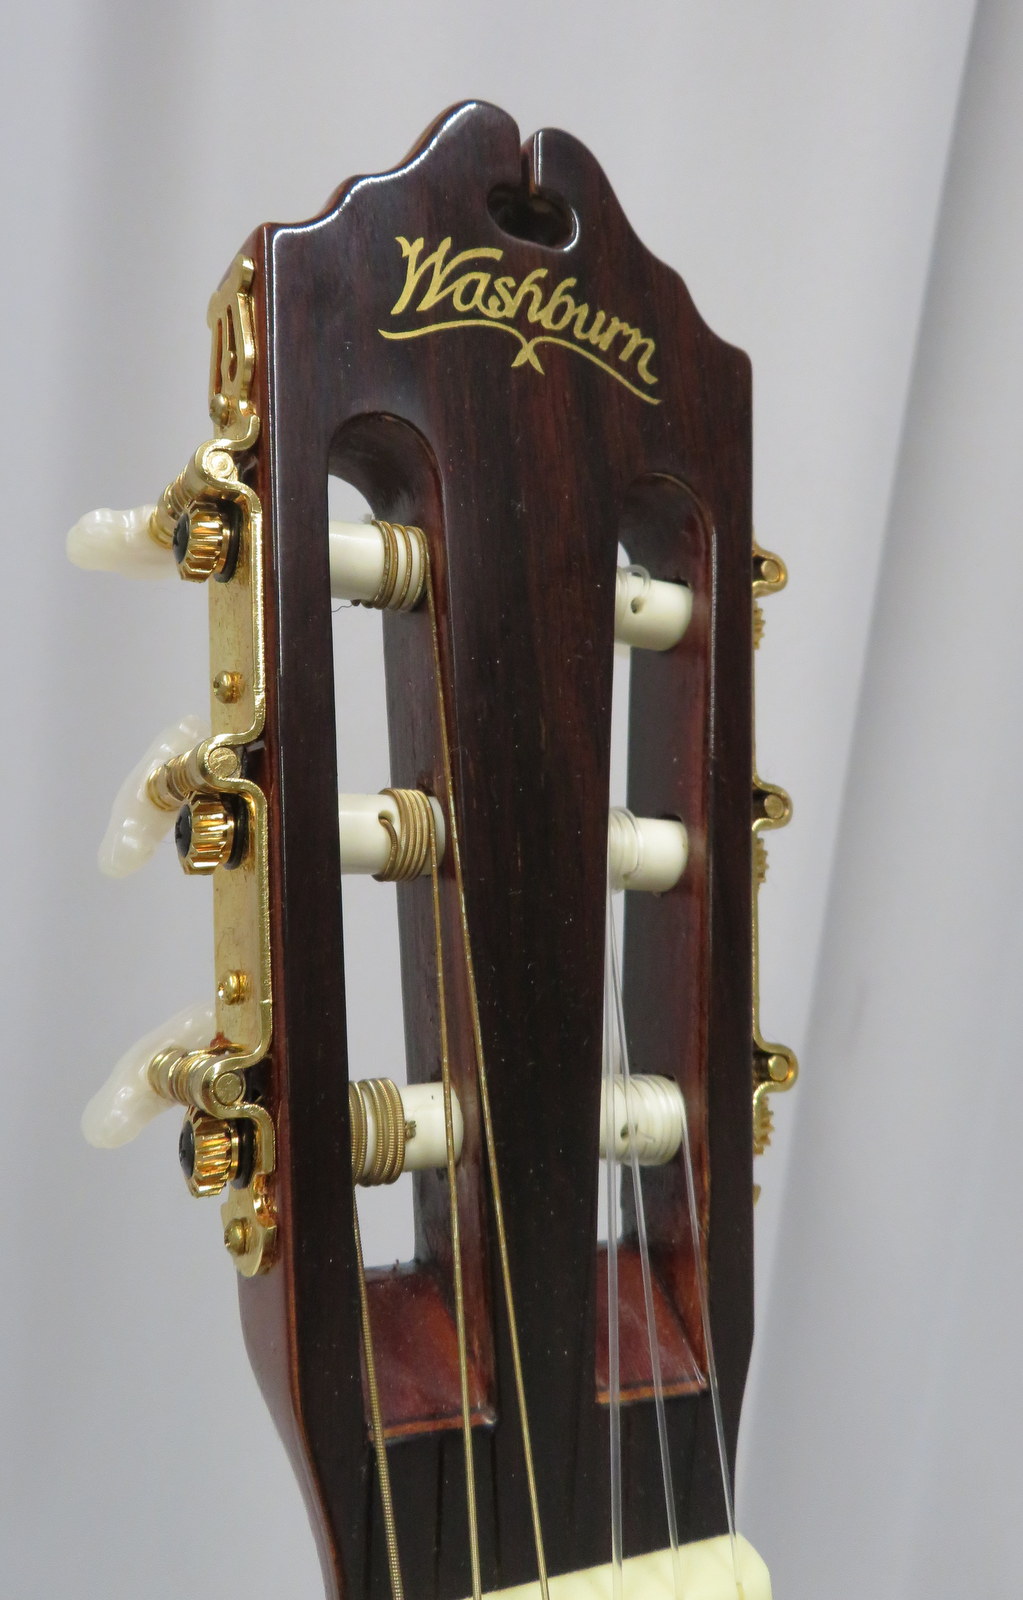 Washburn Enrique Tapicas C8S acoustic guitar with case. Serial number: 96010012. - Image 4 of 13